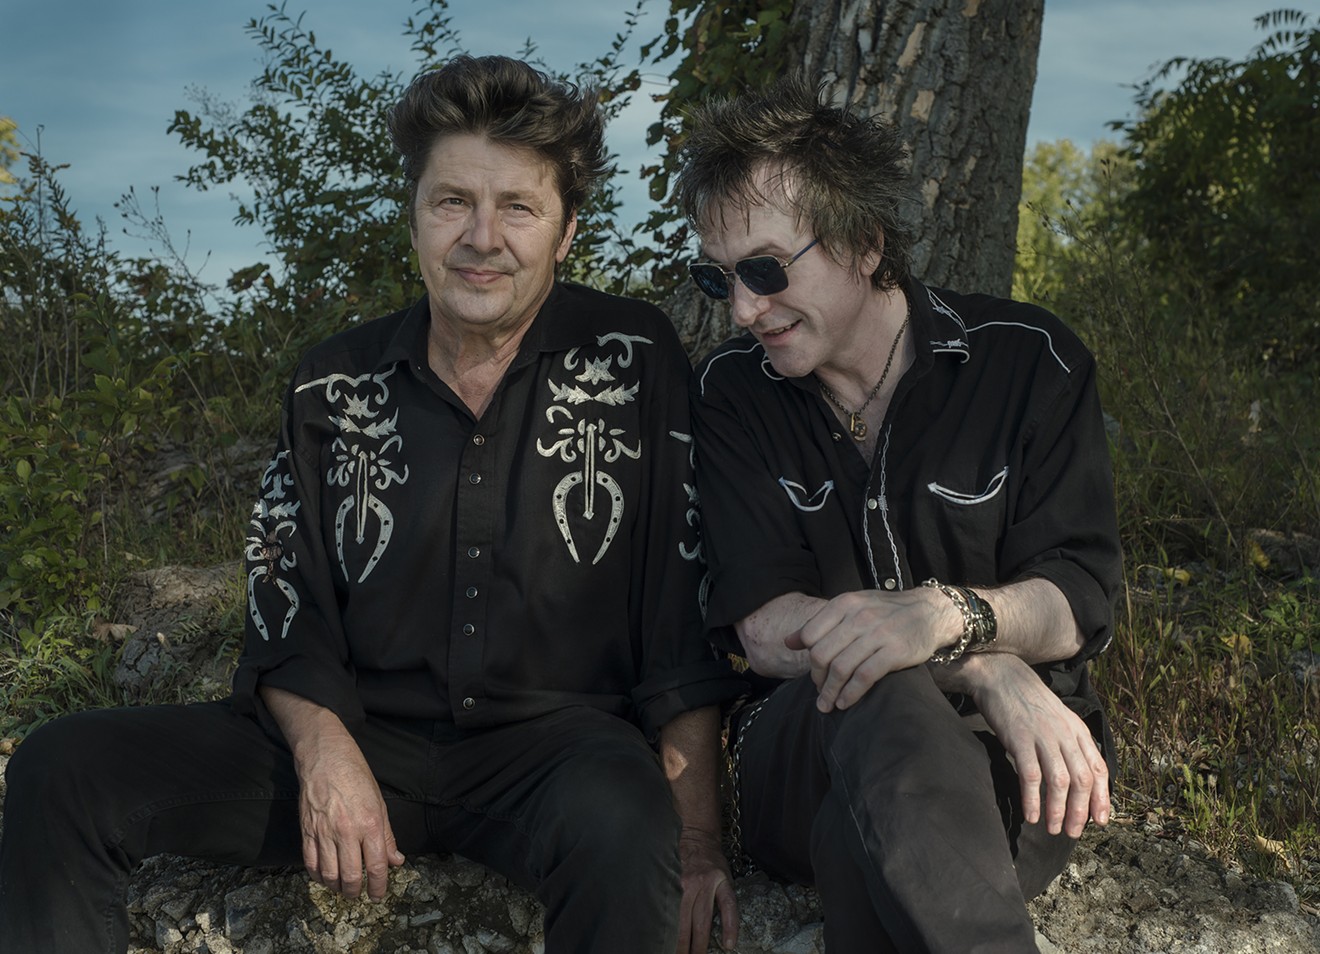 Chip Roberts and Tommy Stinson are Cowboys in the Campfire.